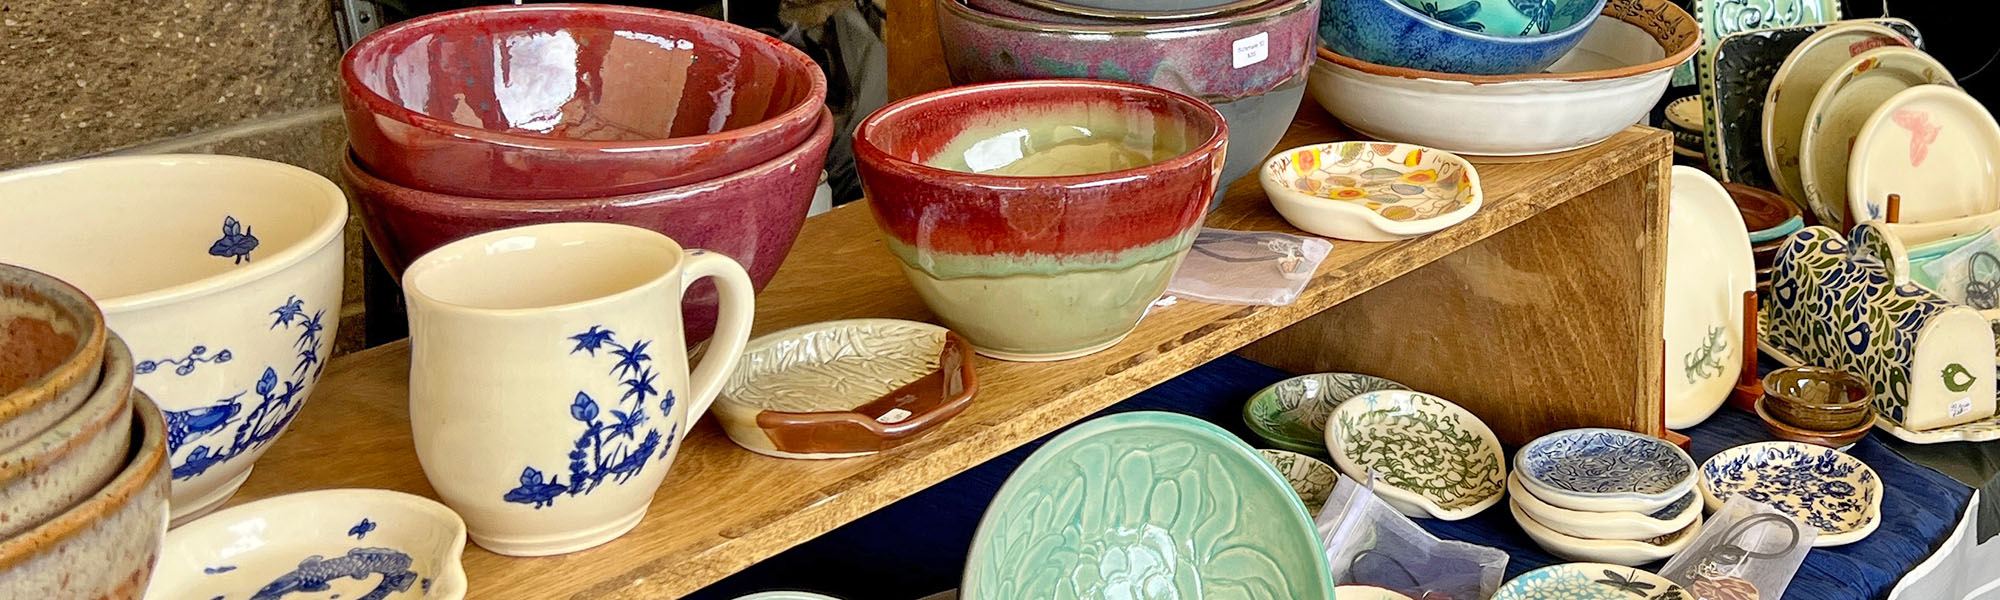 A variety of colorful pottery pieces like bowls, mugs and spoon rests displayed at a pottery sale.